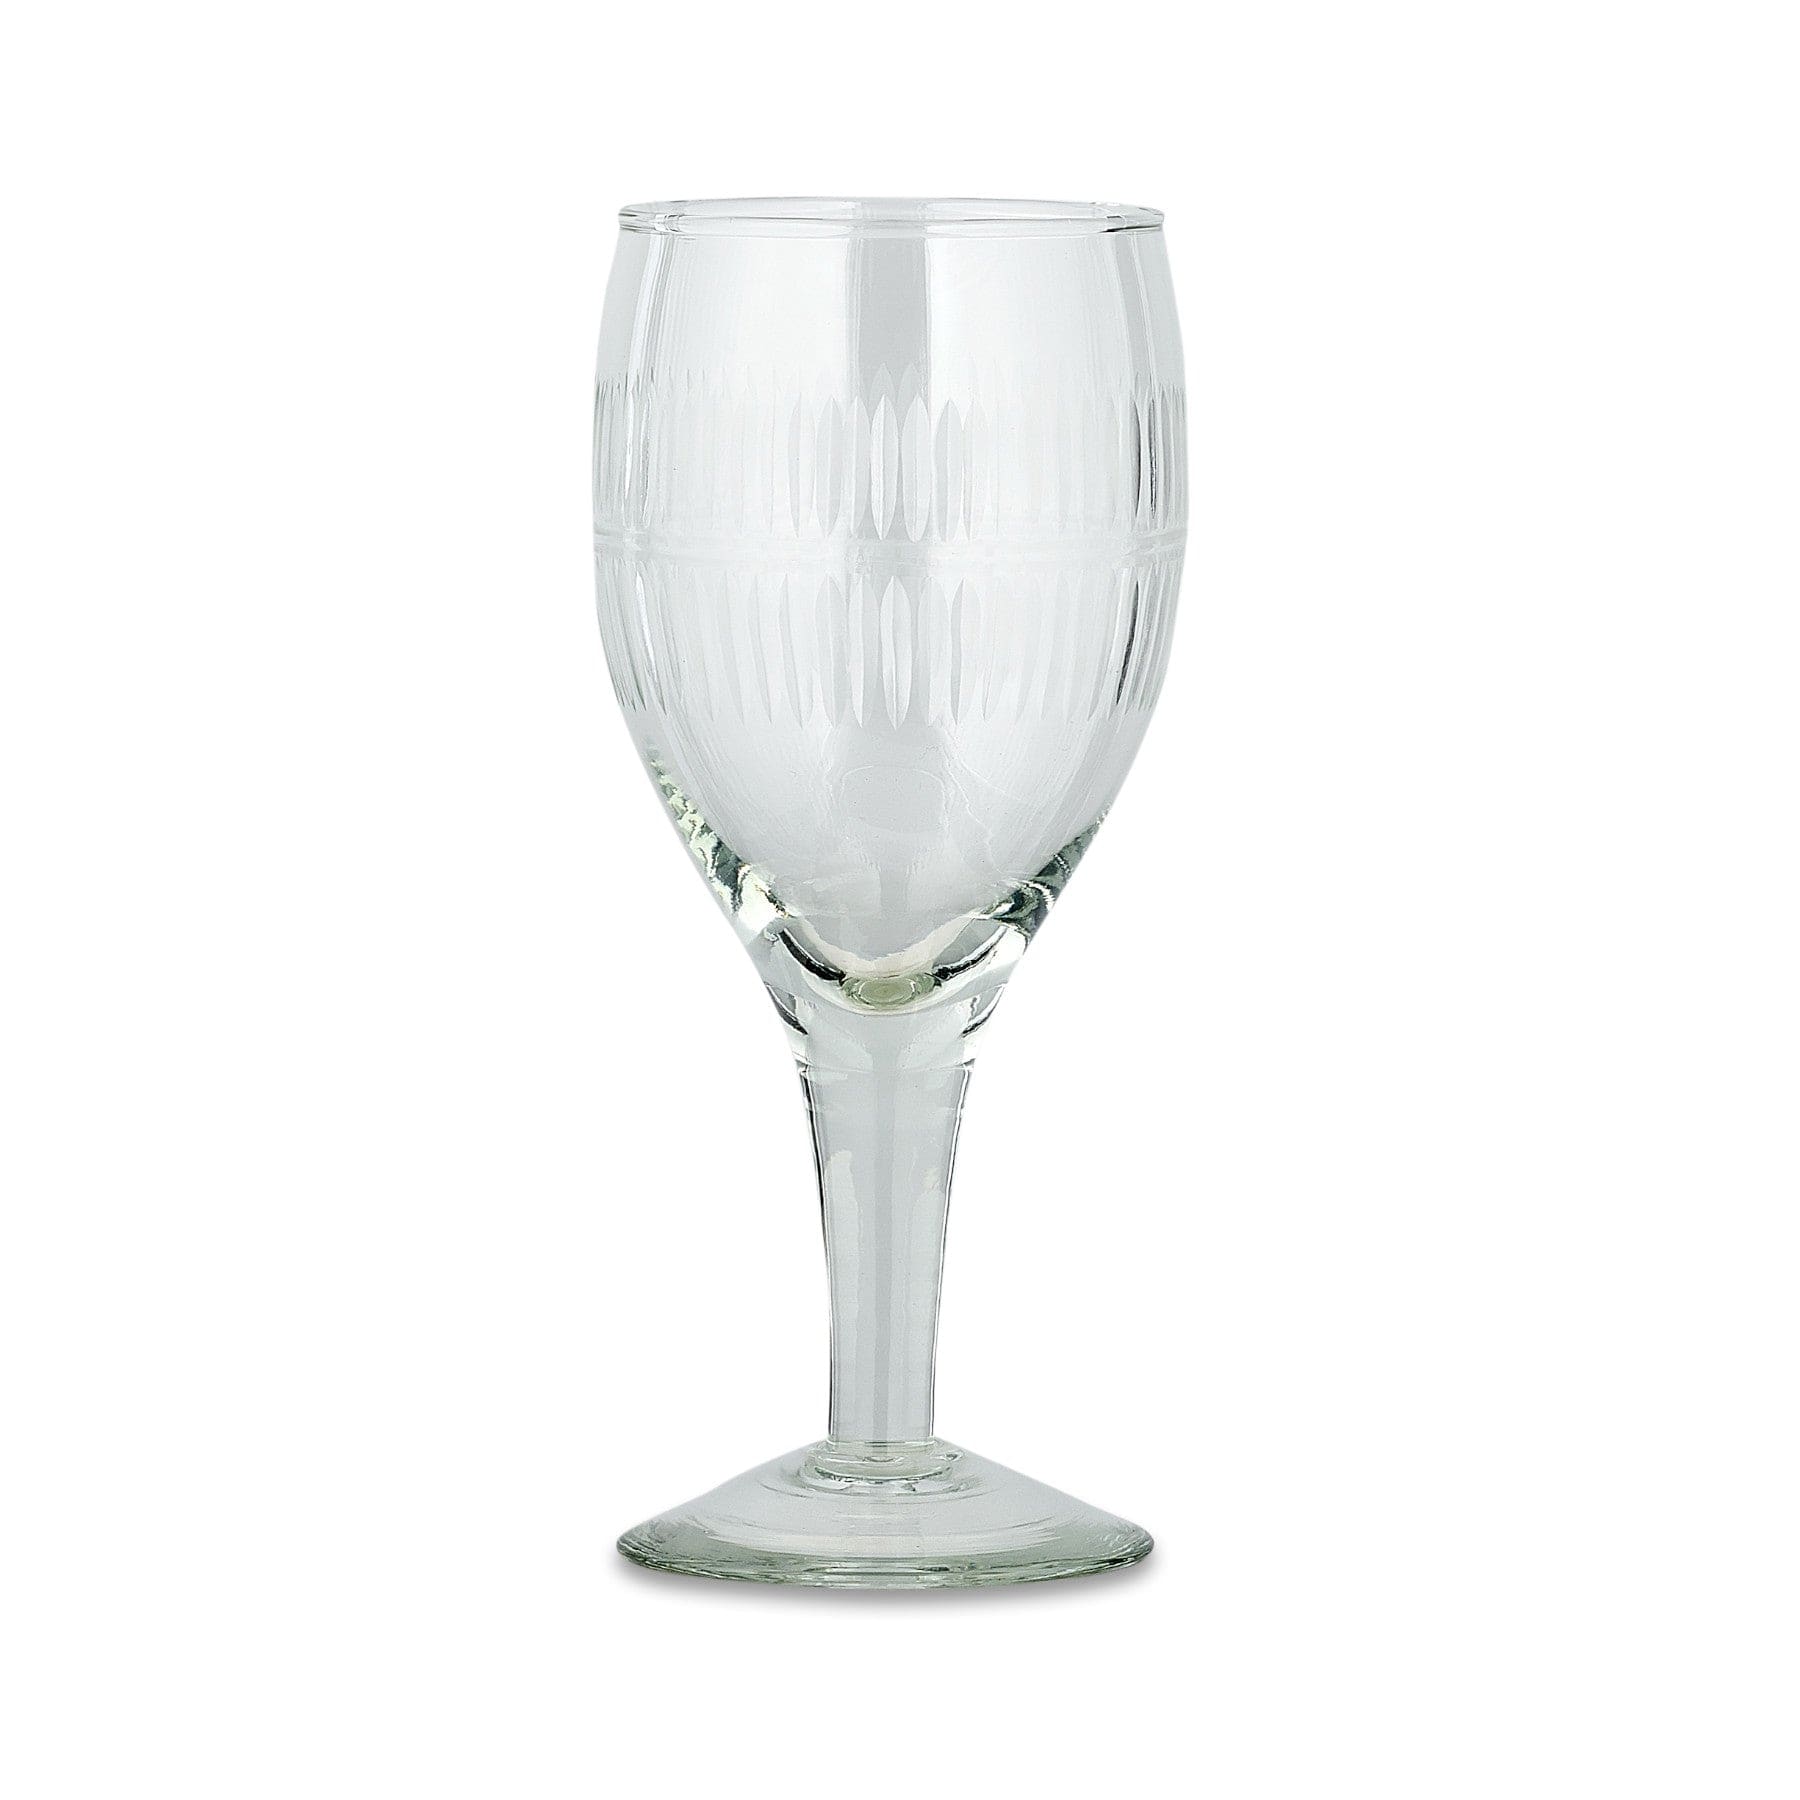 Empty wine glass with ribbed pattern isolated on white background.